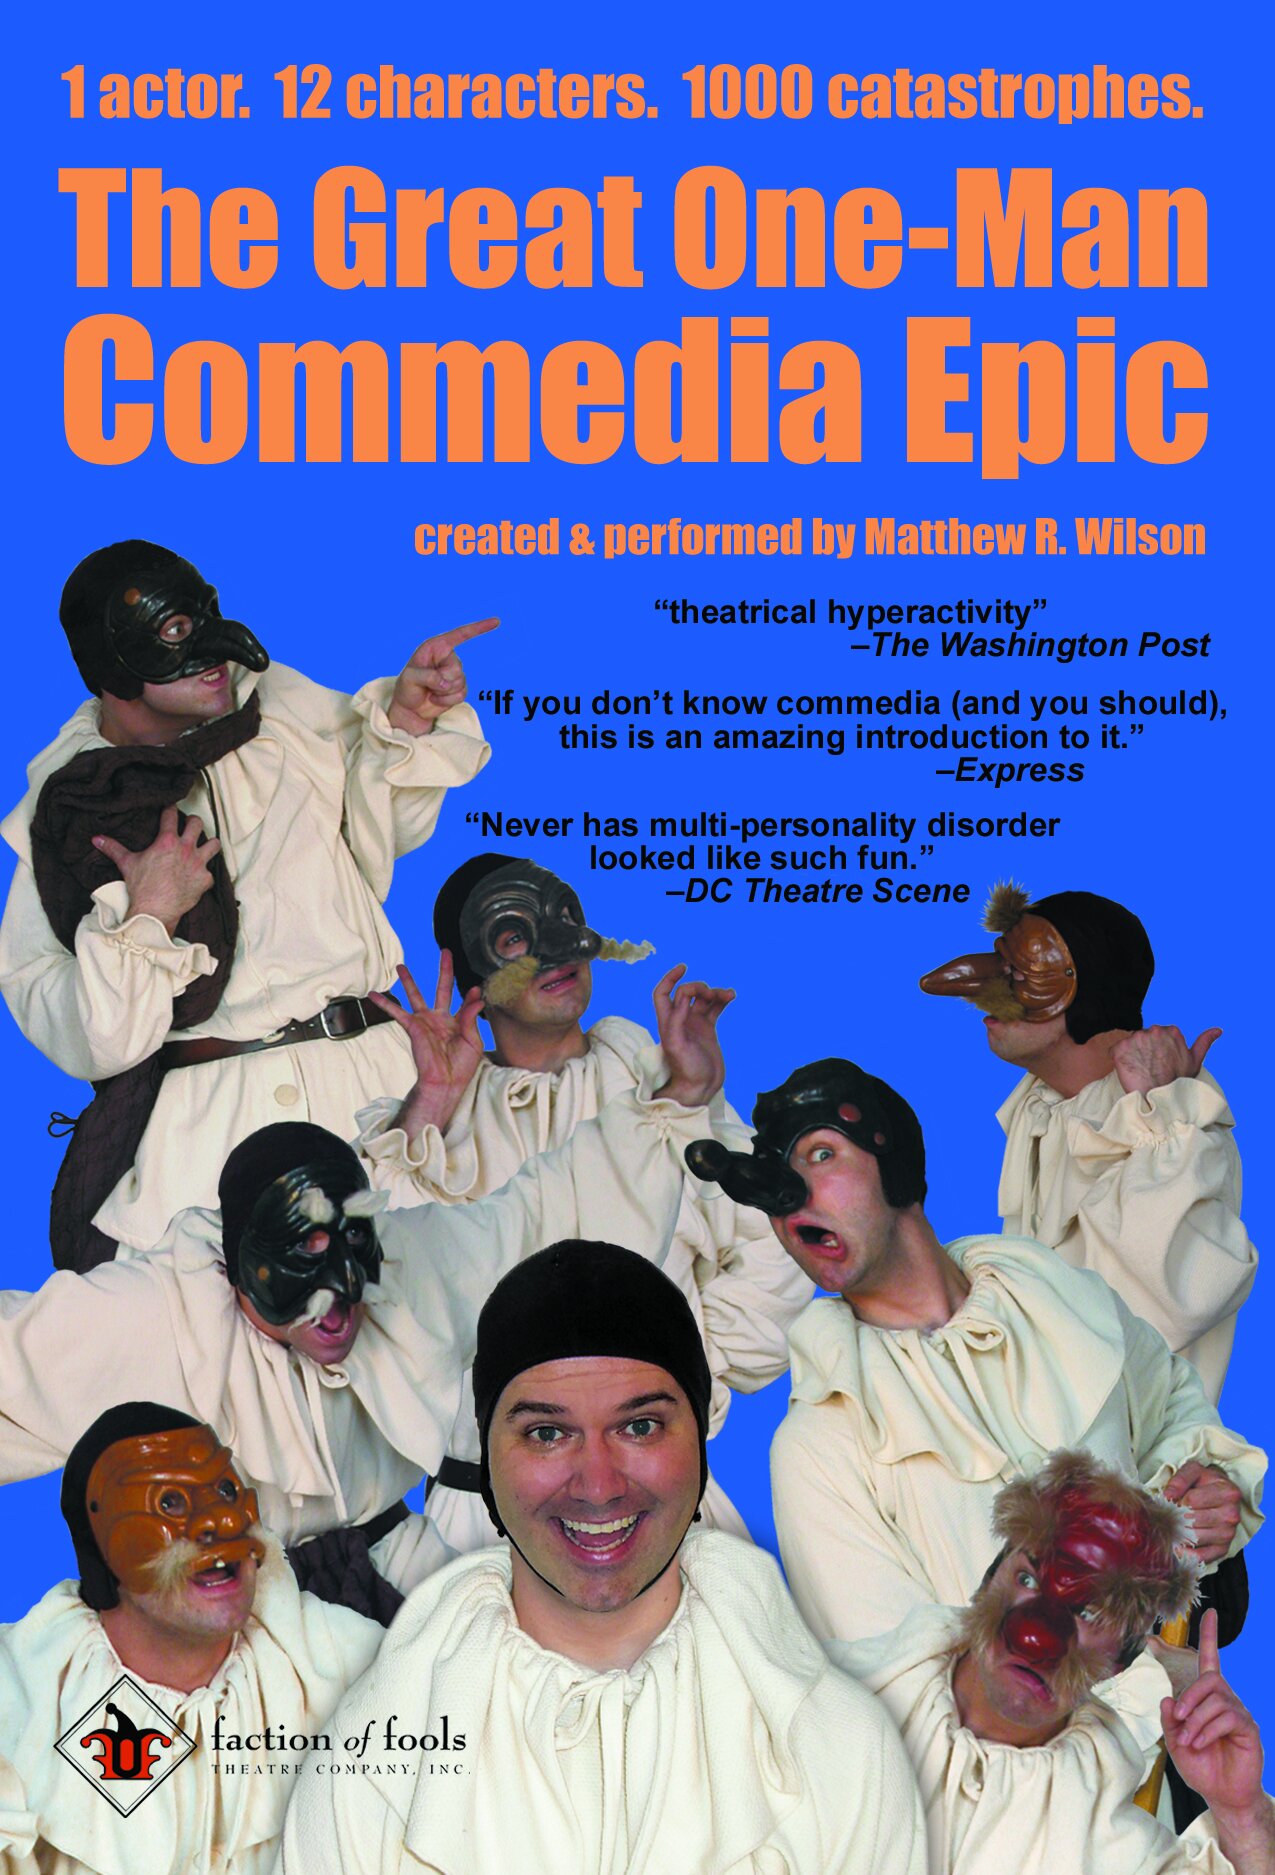  Poster for  The Great One-Man Commedia Epic  